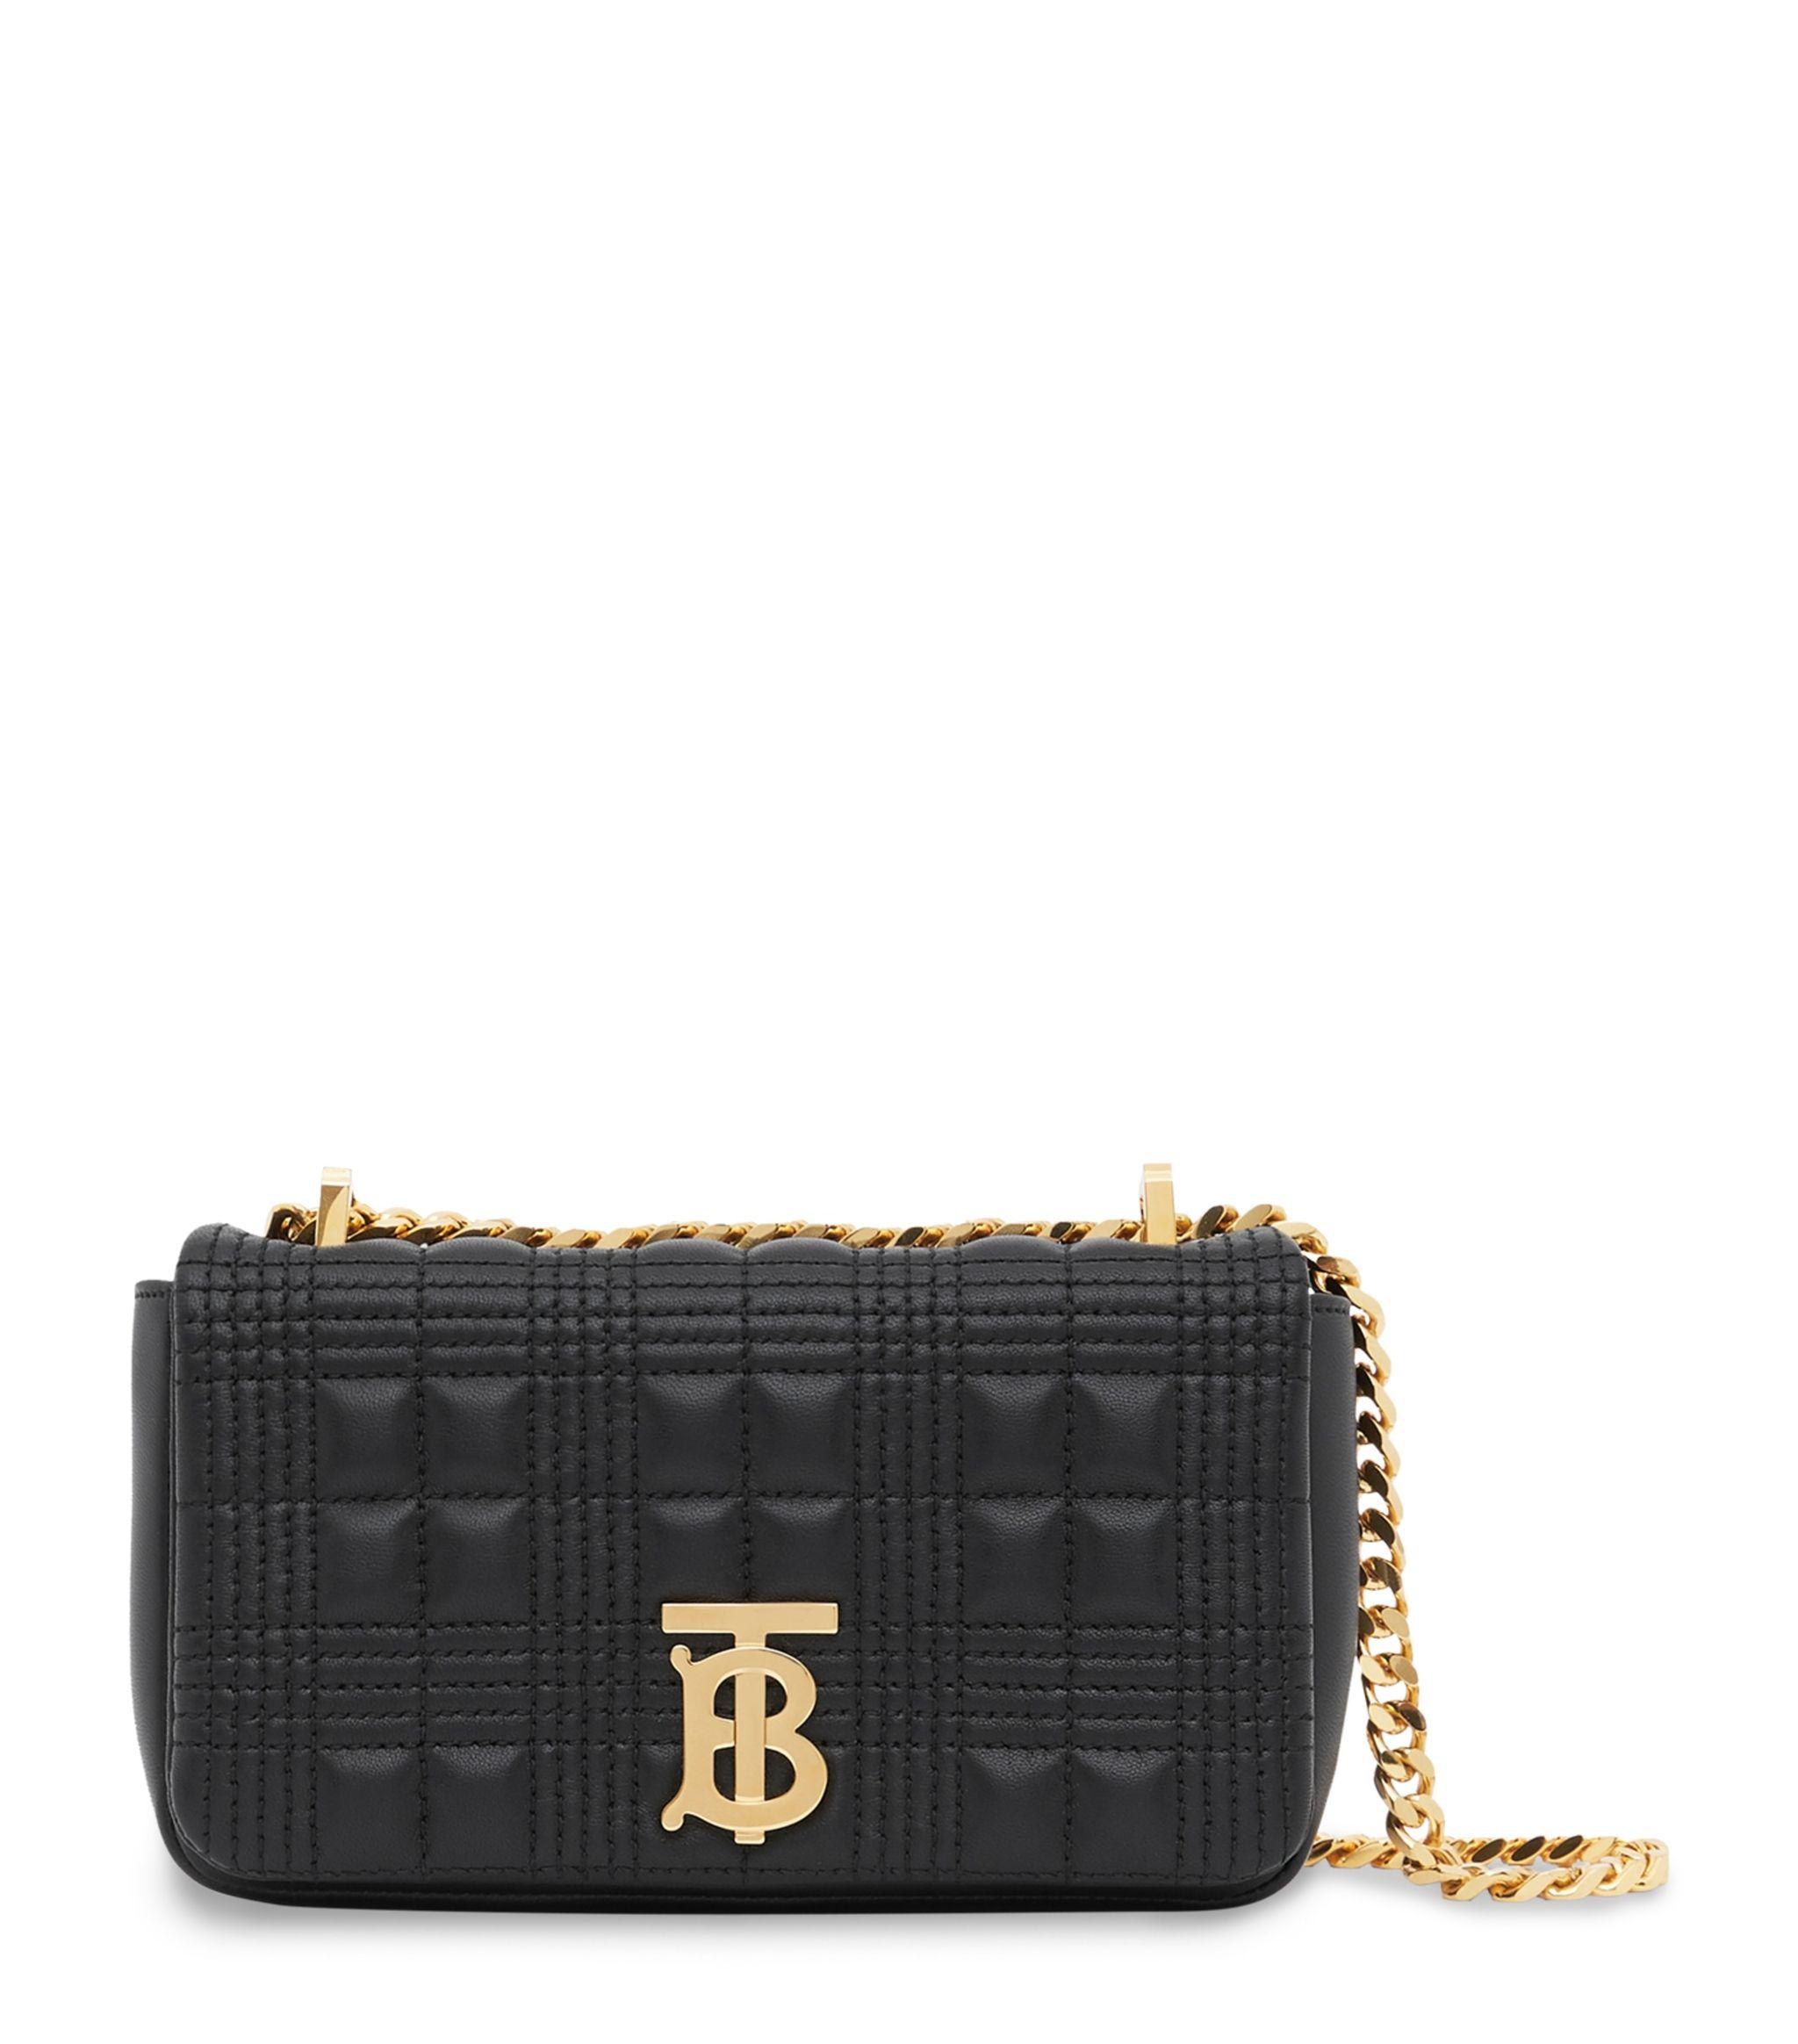 Burberry Mini Quilted Leather Lola Shoulder Bag in Black - Lyst